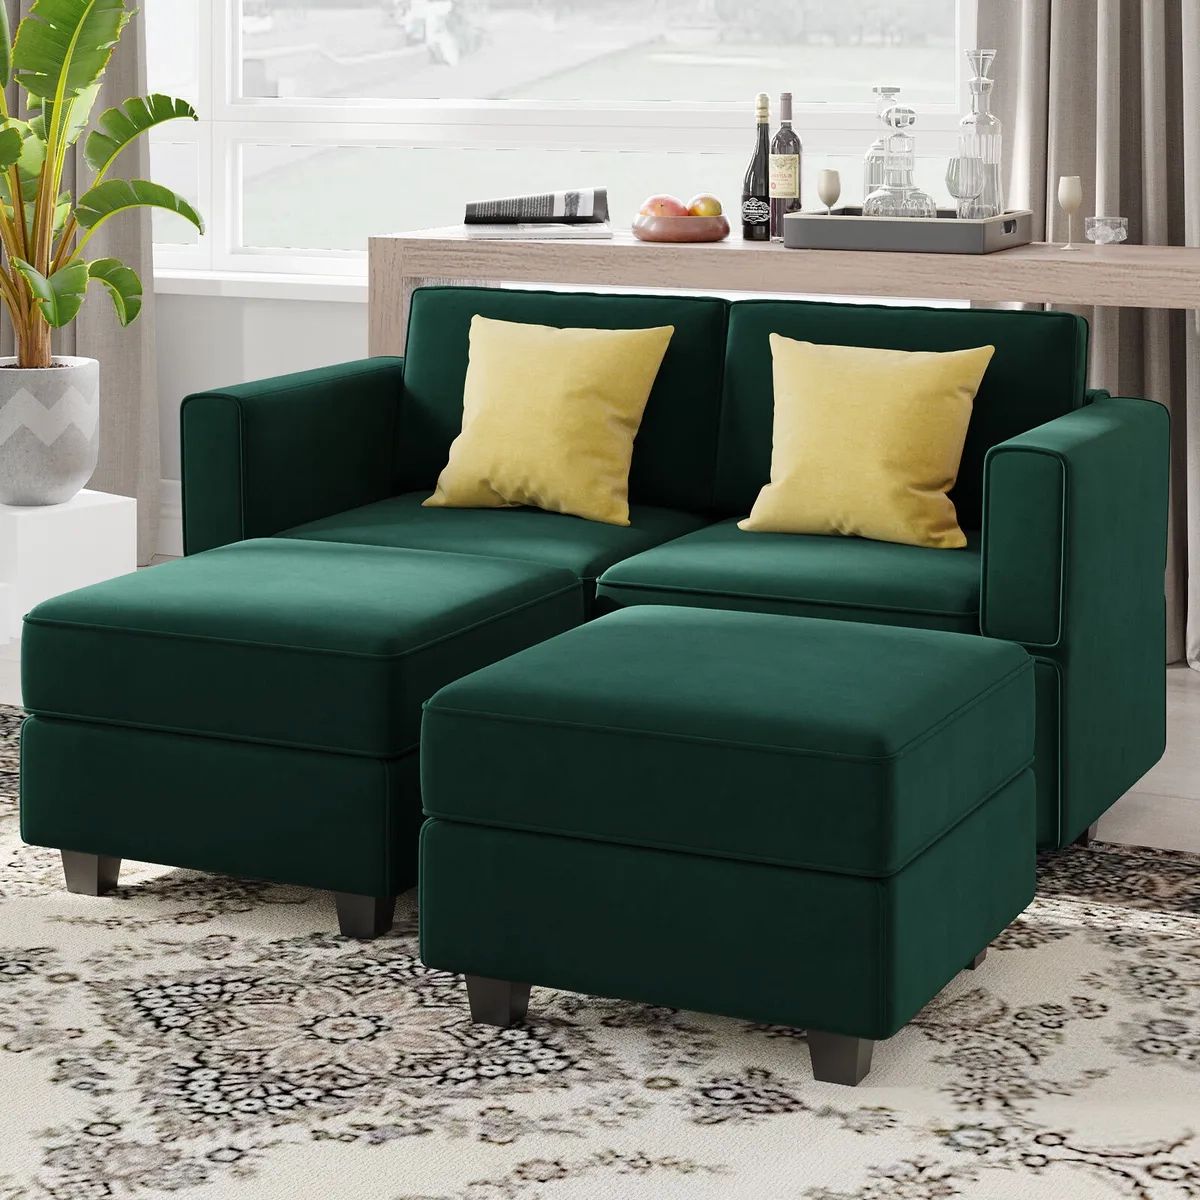 Belffin Modular Sectional Sofa With Storage Oversized Couch Bed Velvet Green  | Ebay Pertaining To Green Velvet Modular Sectionals (Photo 10 of 15)